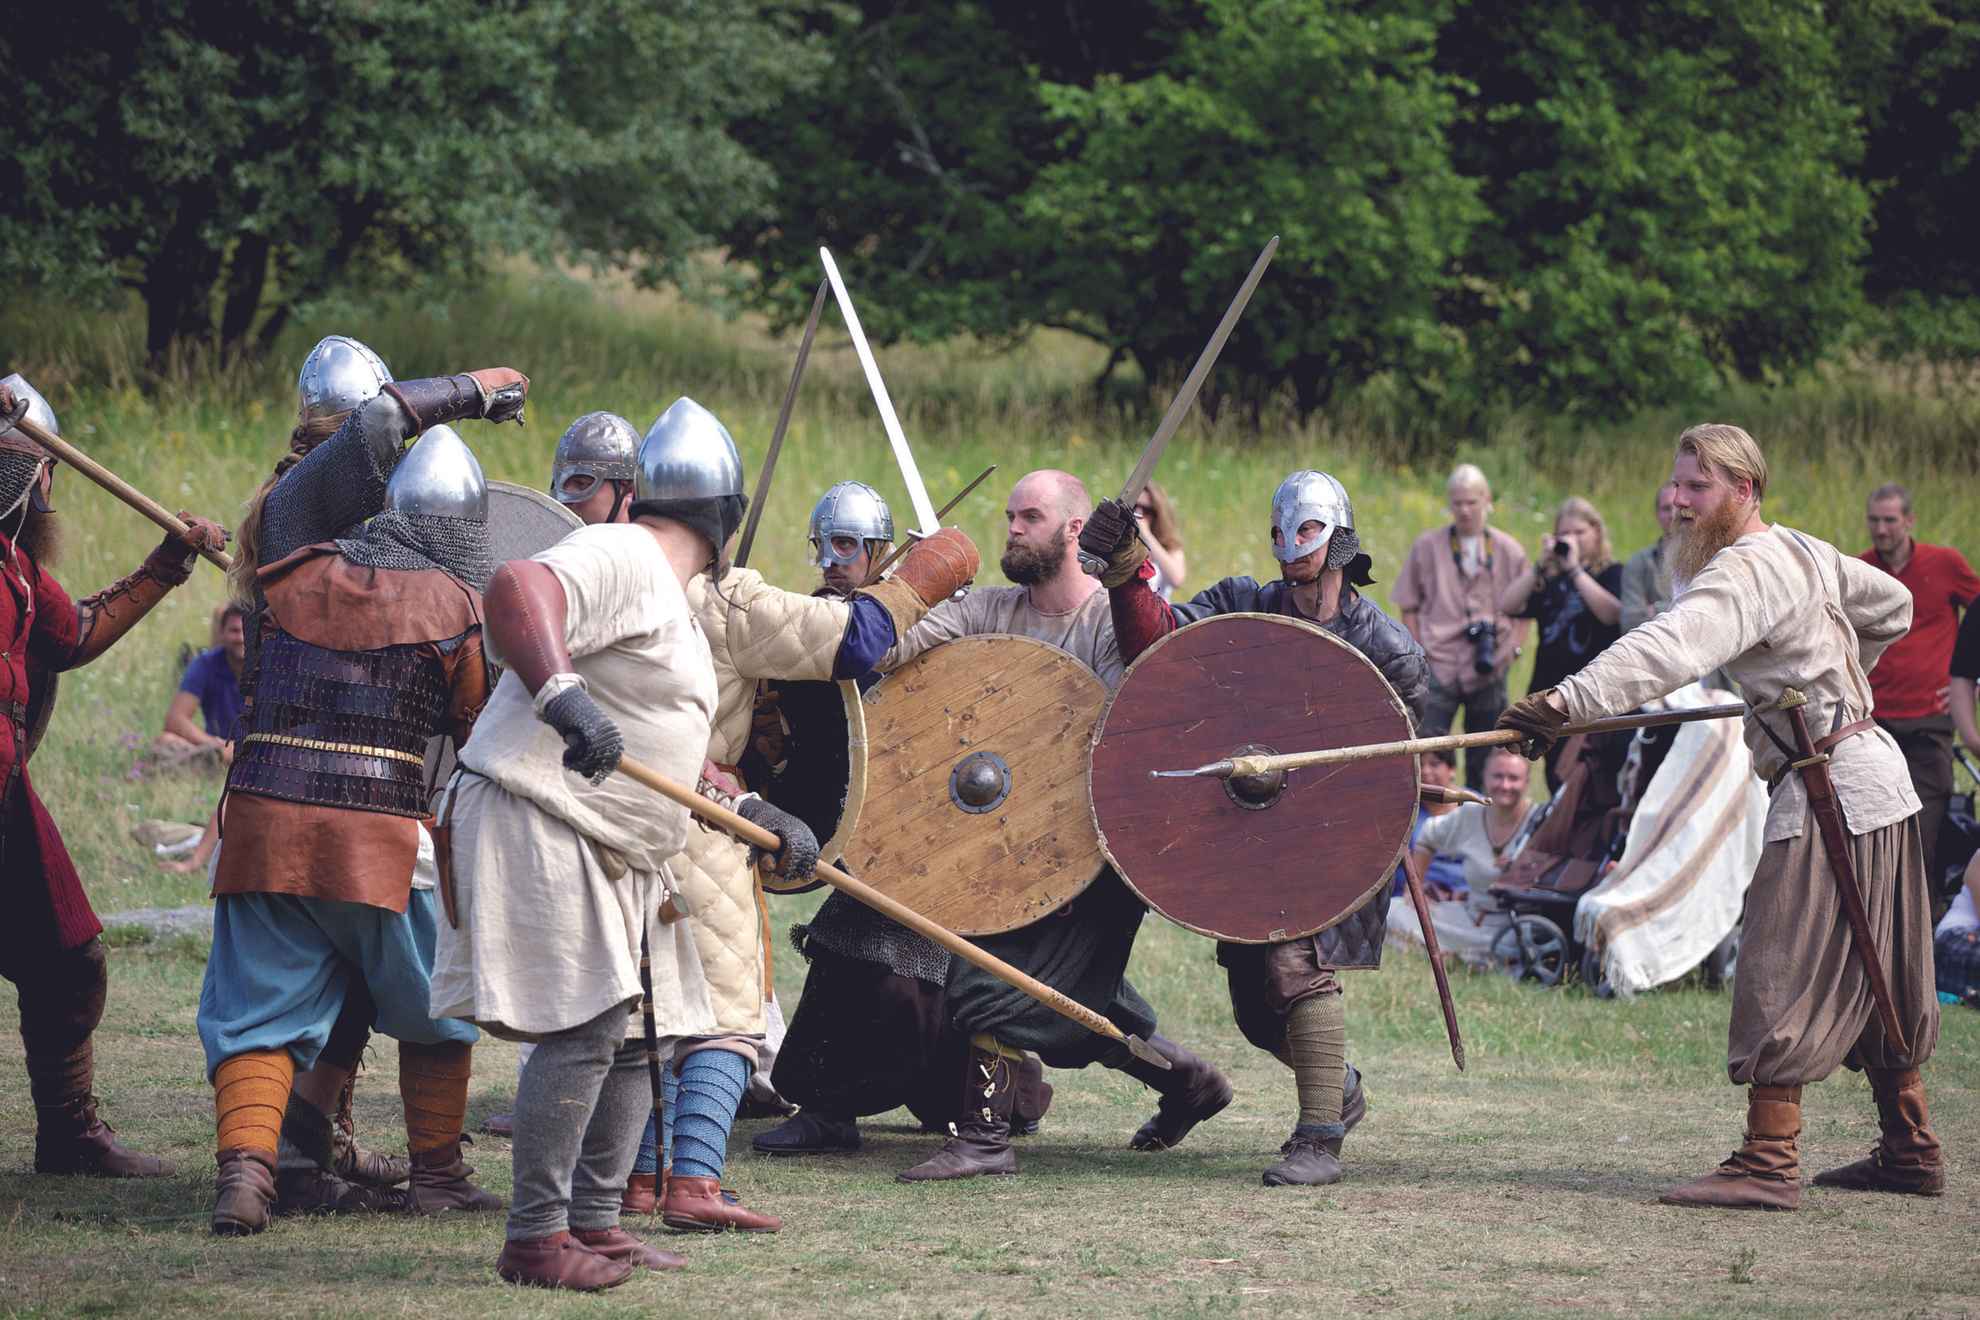 A group of people, all dressed up in viking clothing, is reenacting a battle with spears, swords and shields.